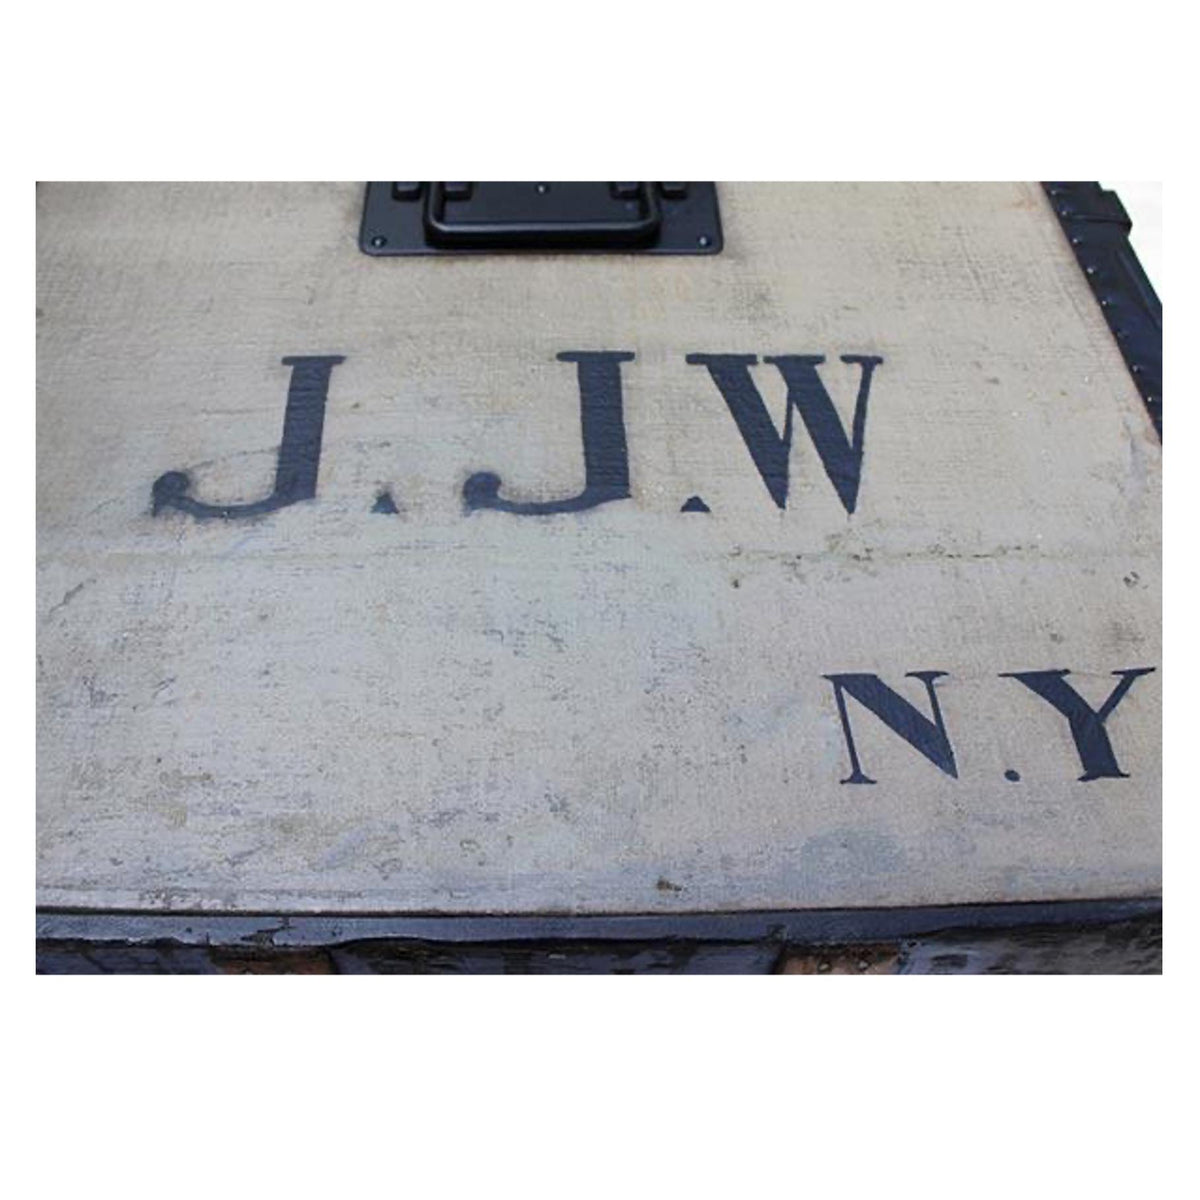 Courier Trunk wth JJW initials